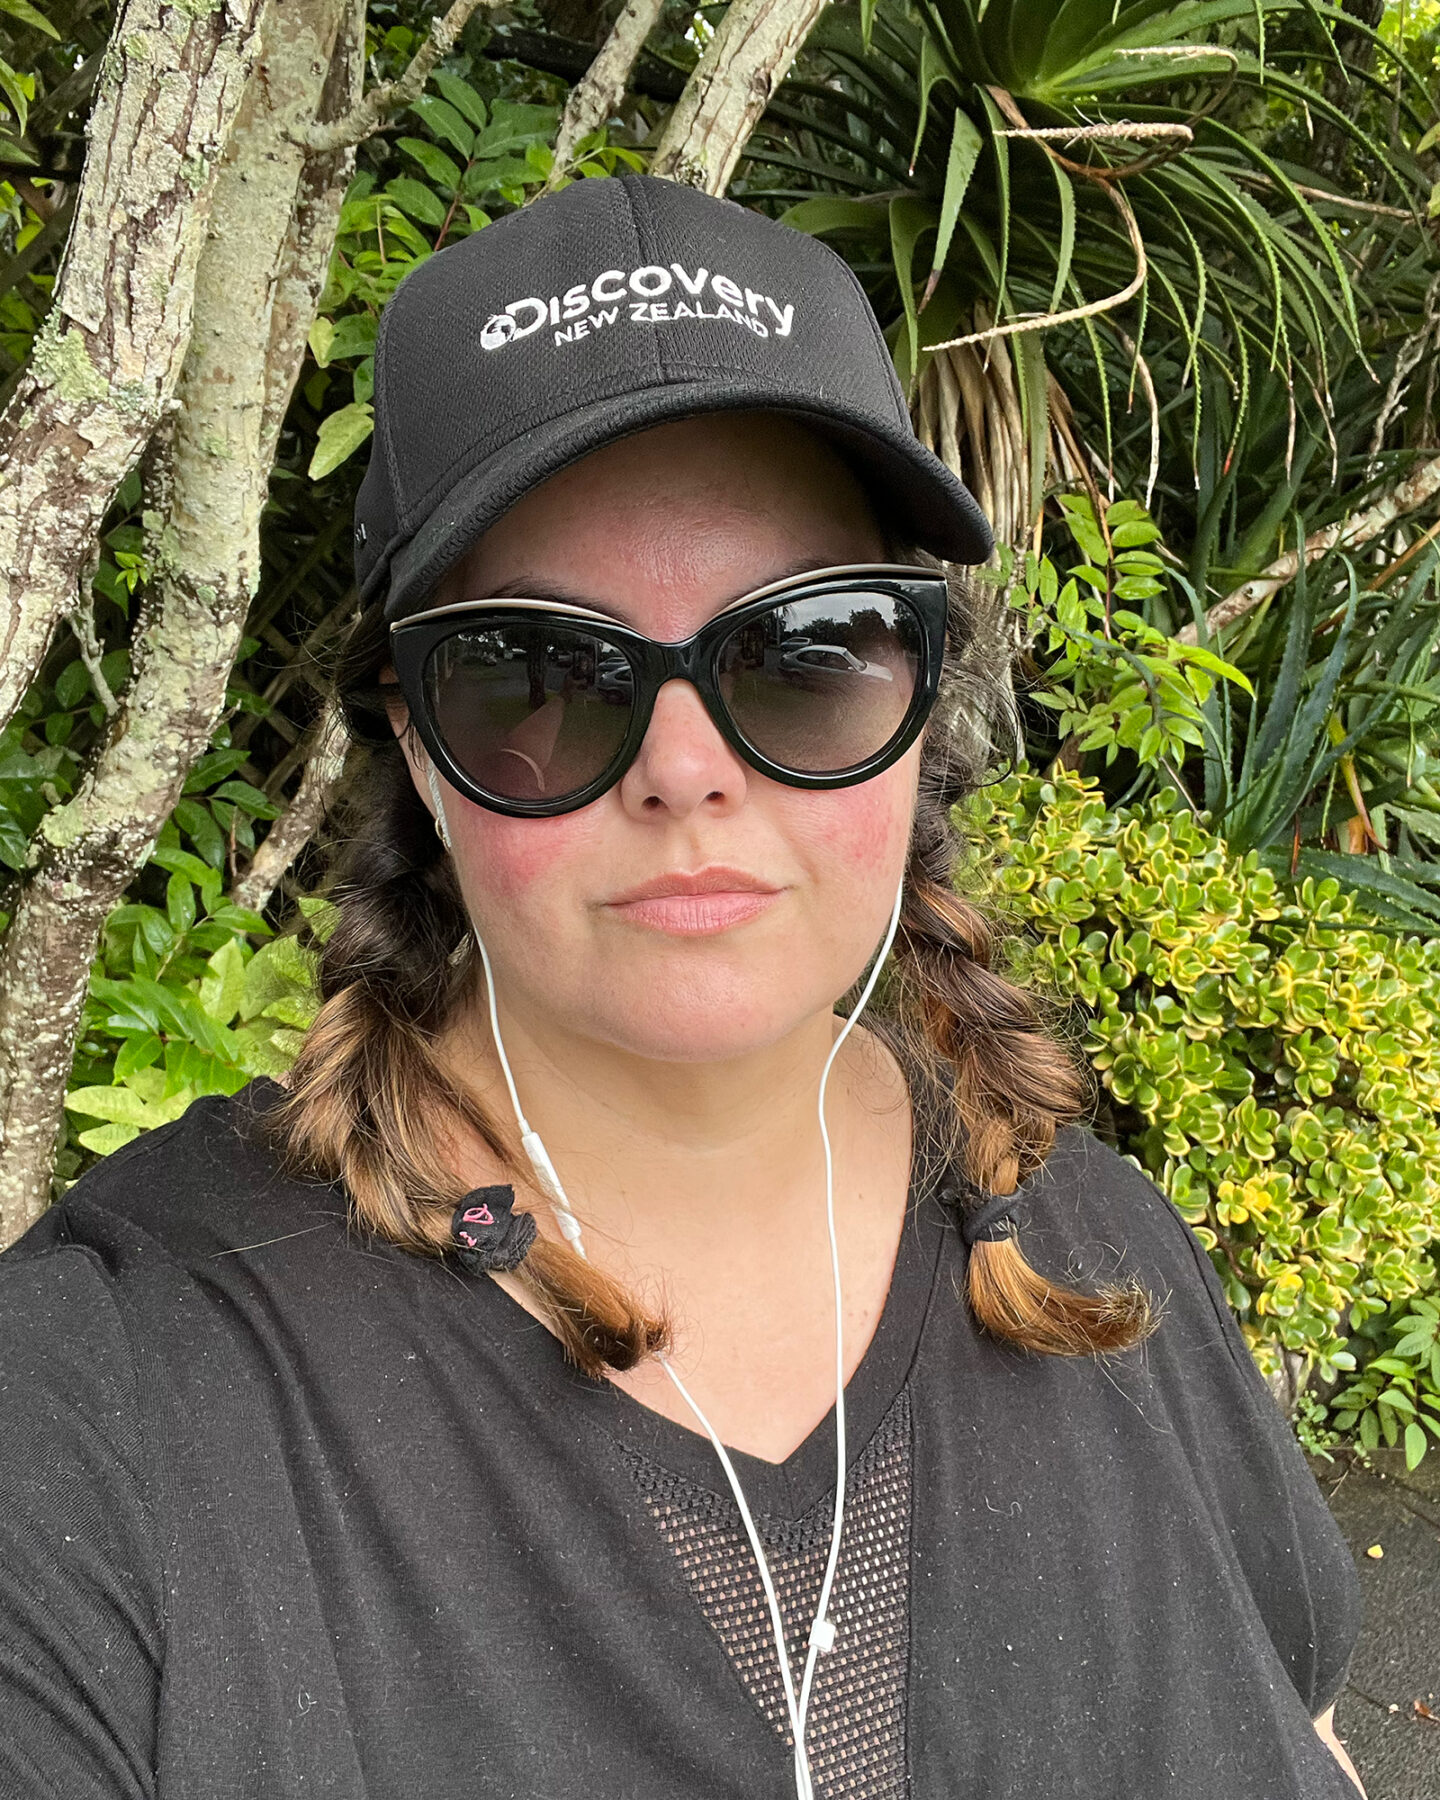 A selfie of a Māori woman walking outside in front of a garden. She is wearing a black t-shirt with sunglases and a black cap that says Discovery New Zealand. She does not look impressed.